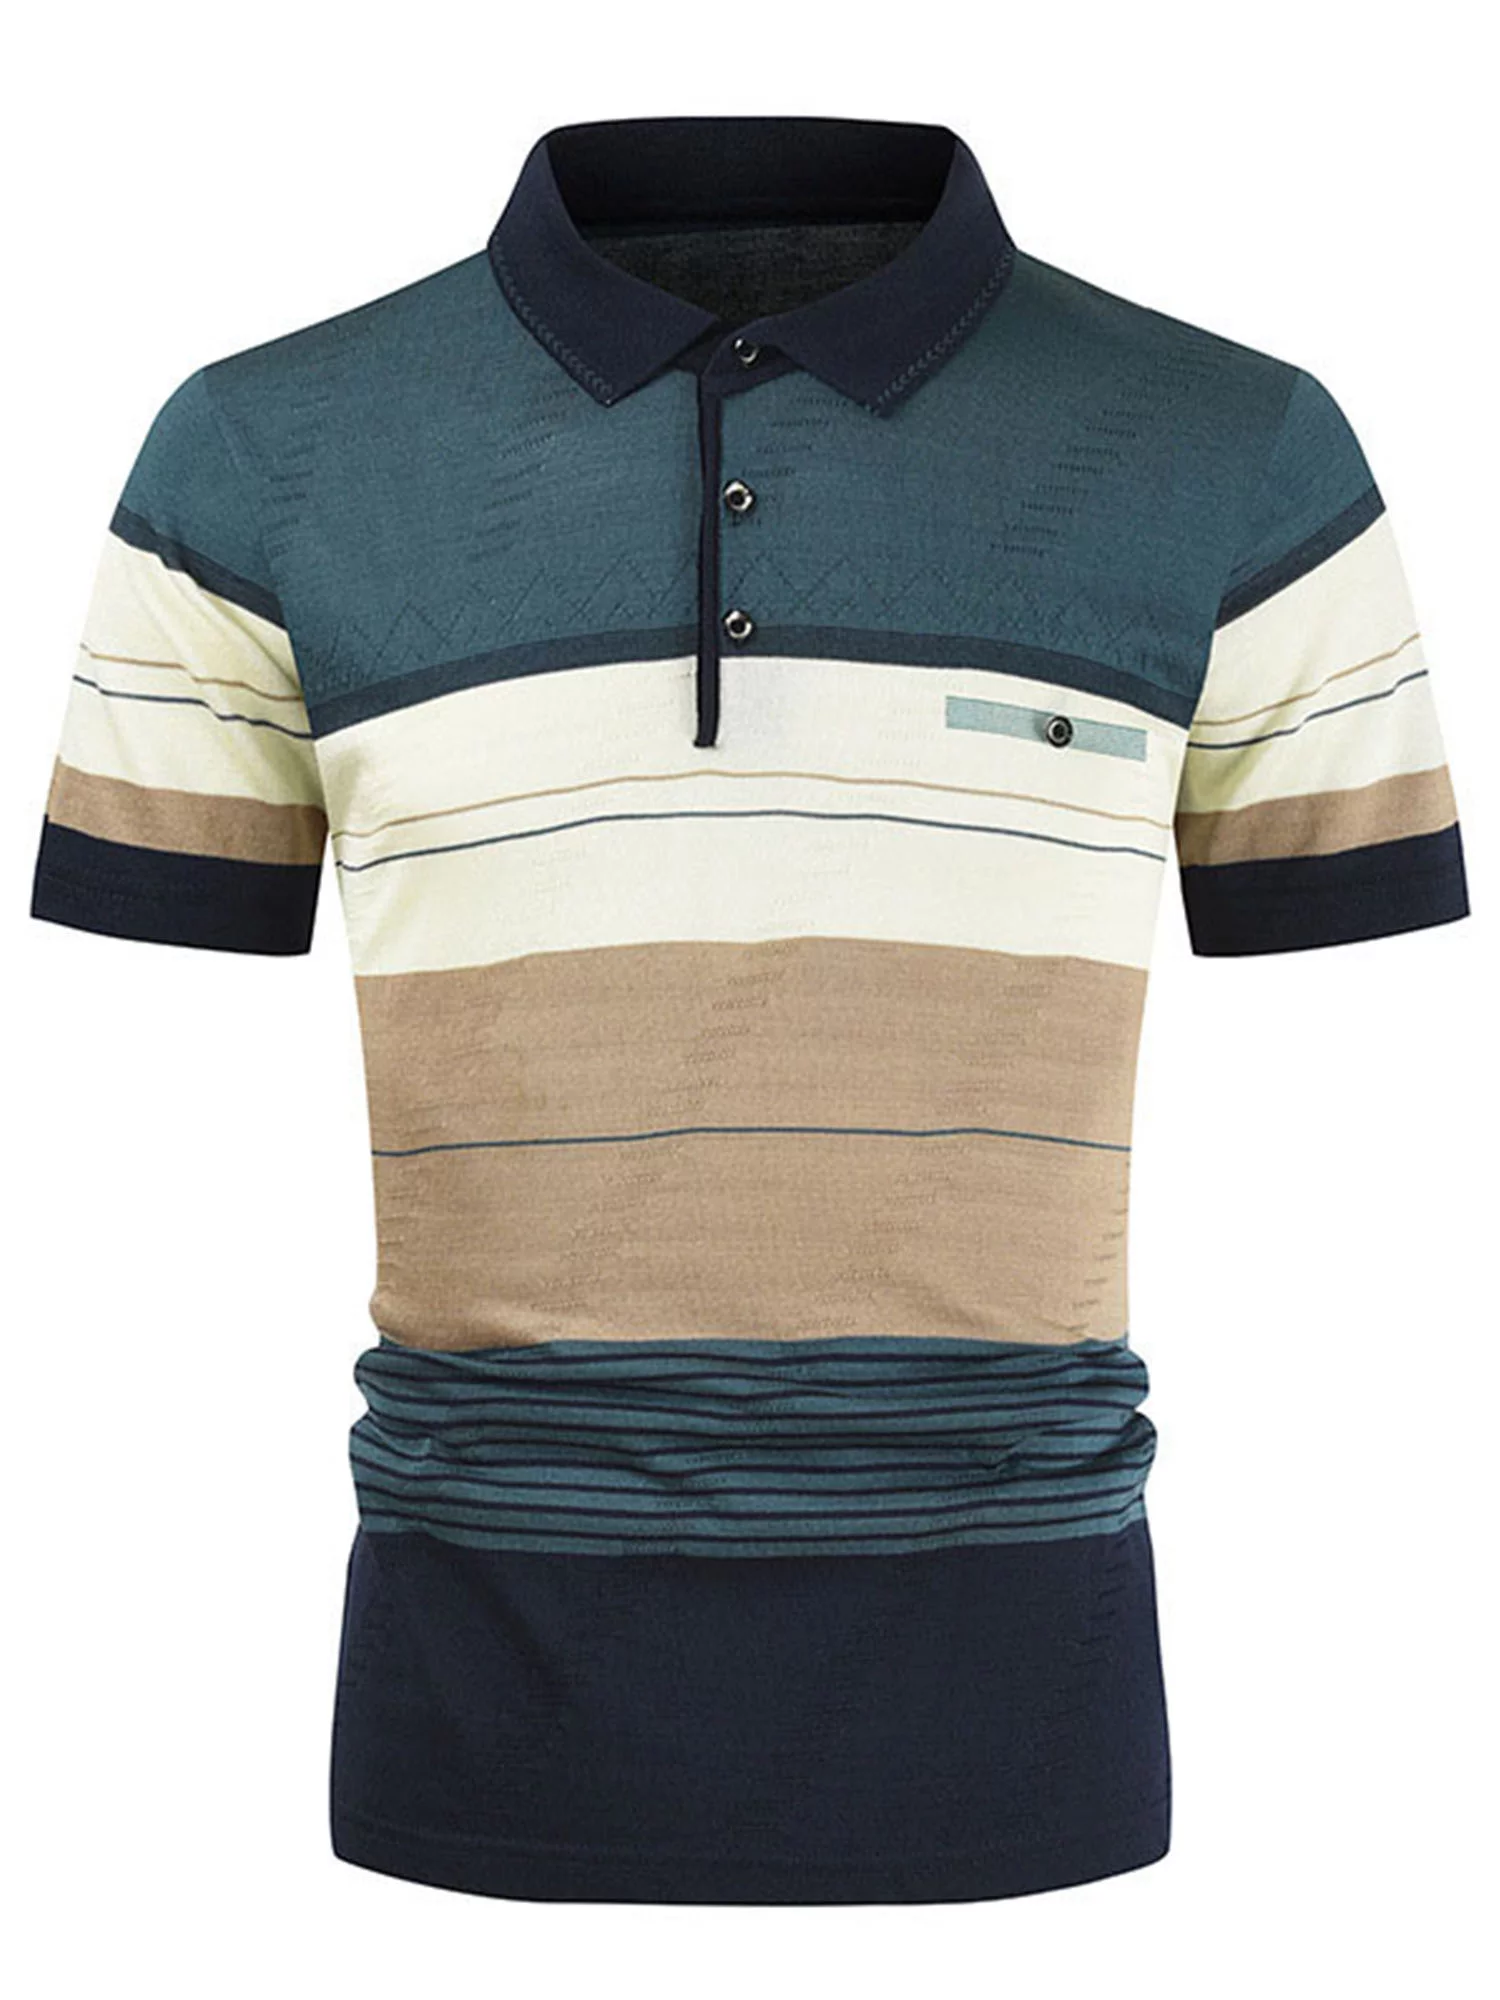 Business Polo Shirts For Men Short Sleeve Striped Polo Sport Shirt Basic Collar Tee Tops